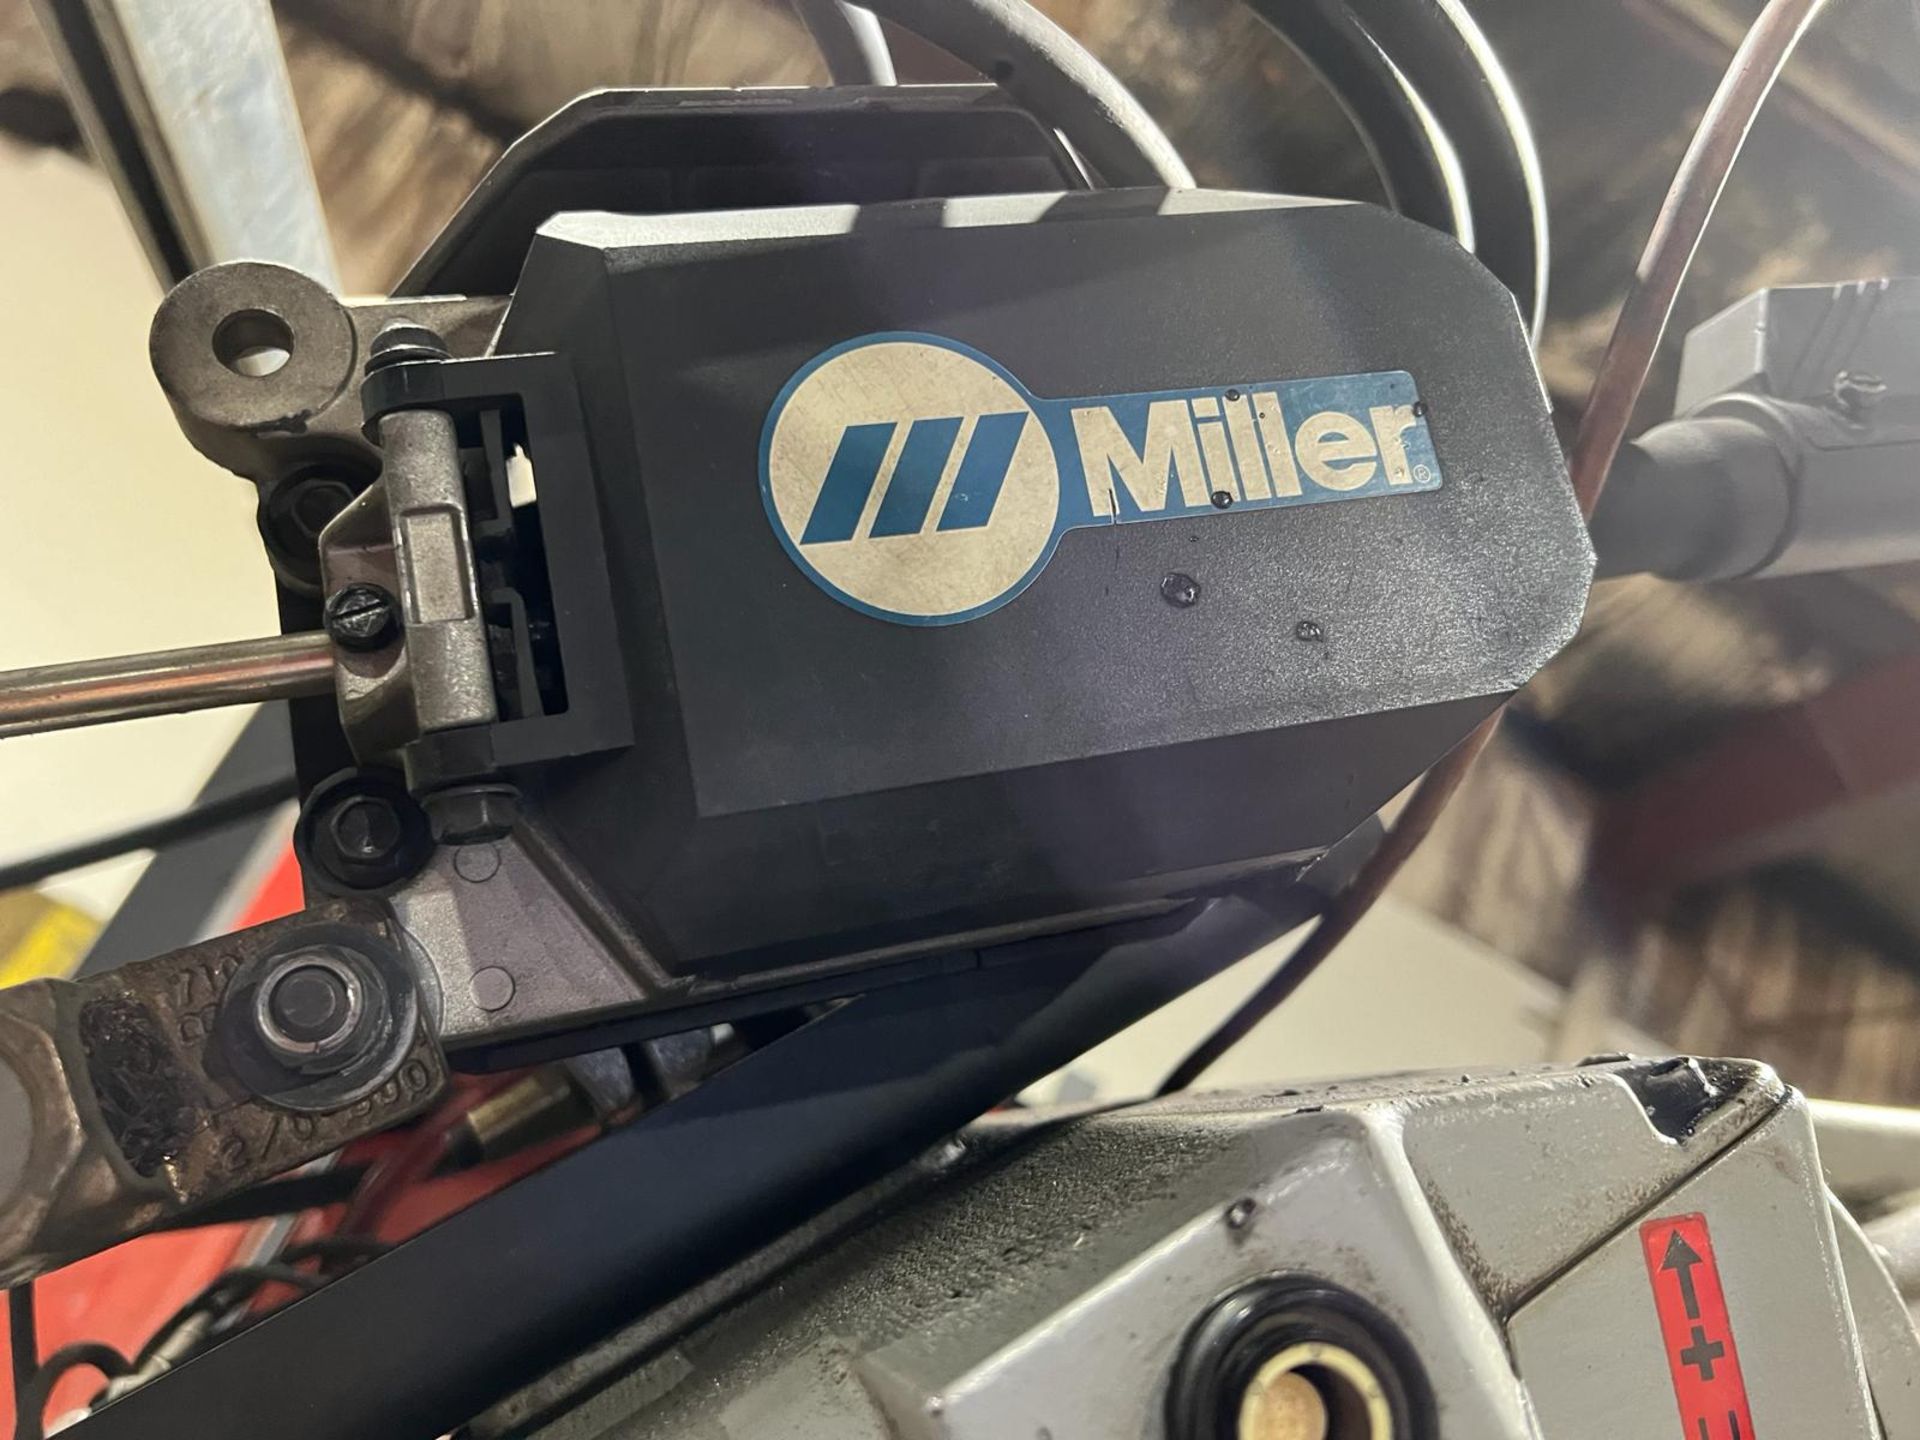 Motoman Model UP-6 Welding Robot Cell with Yasnac Controller, Miller Axcess 450 Welder Tip Cleaner - Image 25 of 26